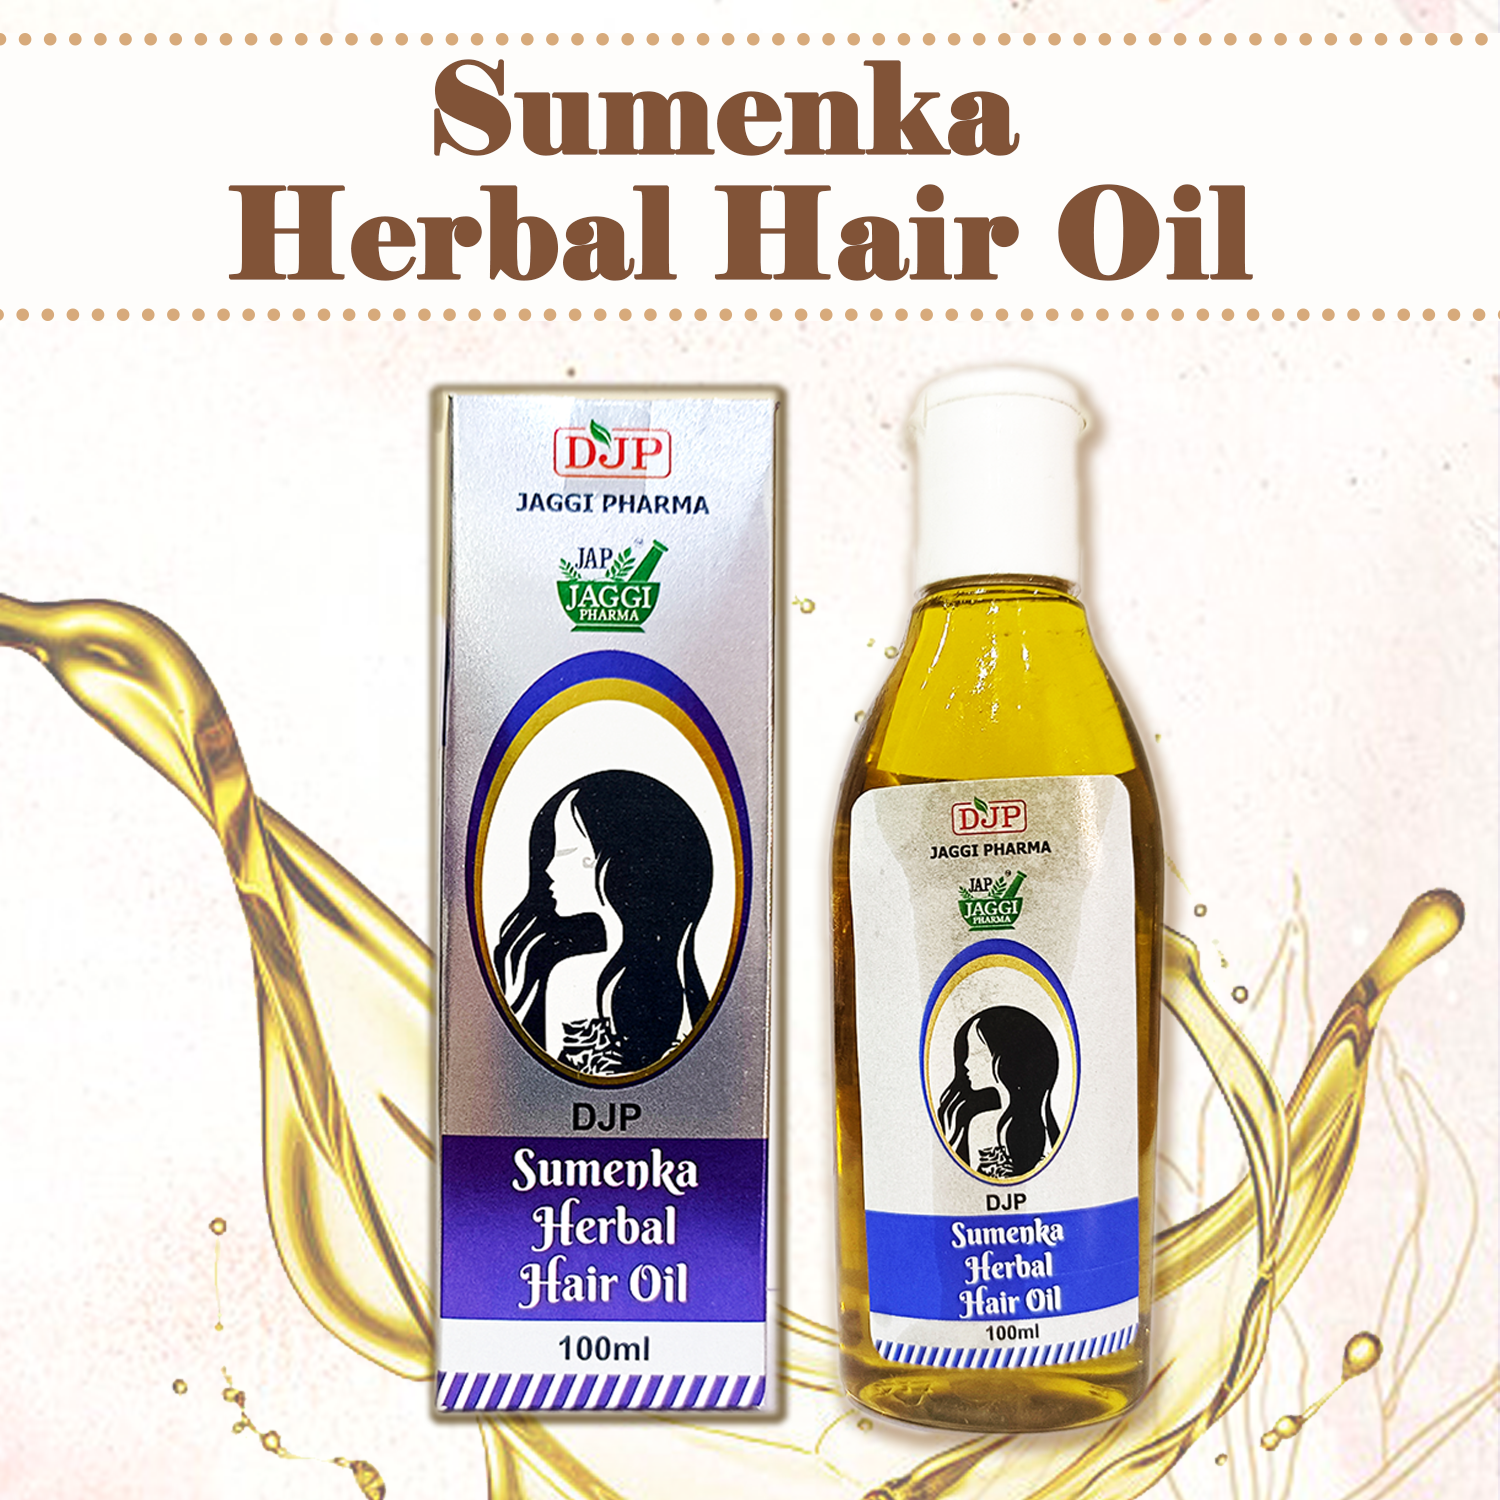 Sumenka Herbal Hair Oil For Hair Fall Control and Regrowth suitable for men and women